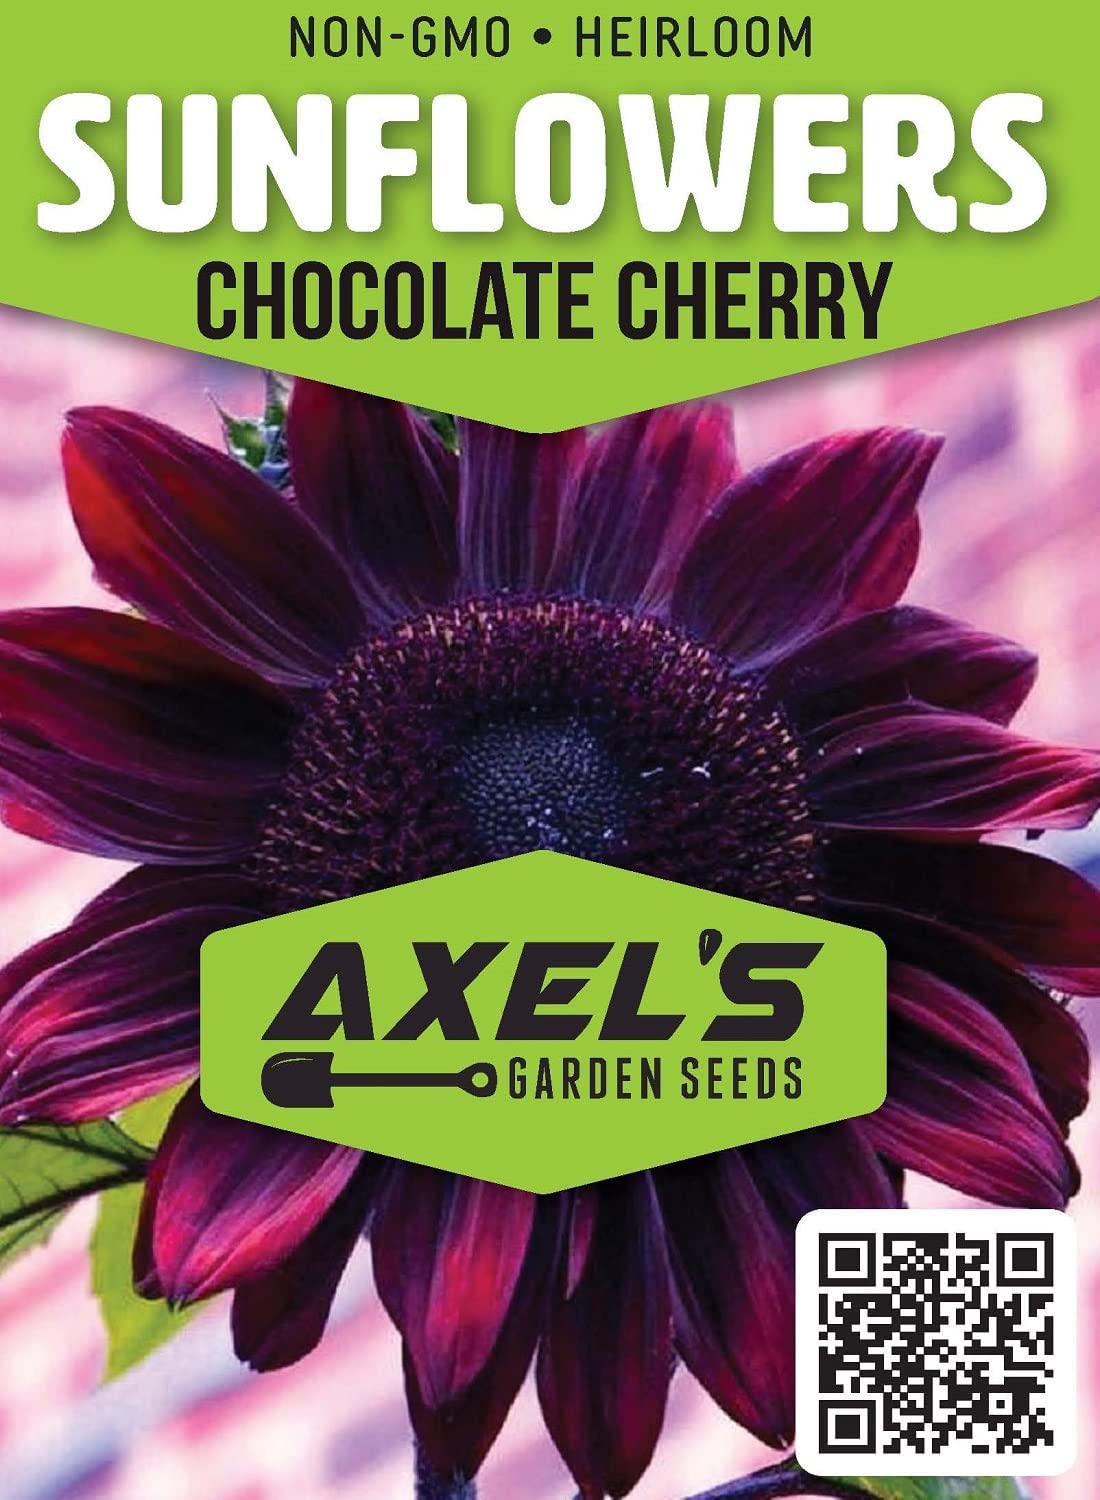 Sunflower Seeds for Planting – Grow Purple Chocolate Cherry Sun Flowers in Your Garden – 25 Non GMO Heirloom Seeds – Full Planting Instructions for Easy to Grow – Great Gardening Gifts (1 Packet)